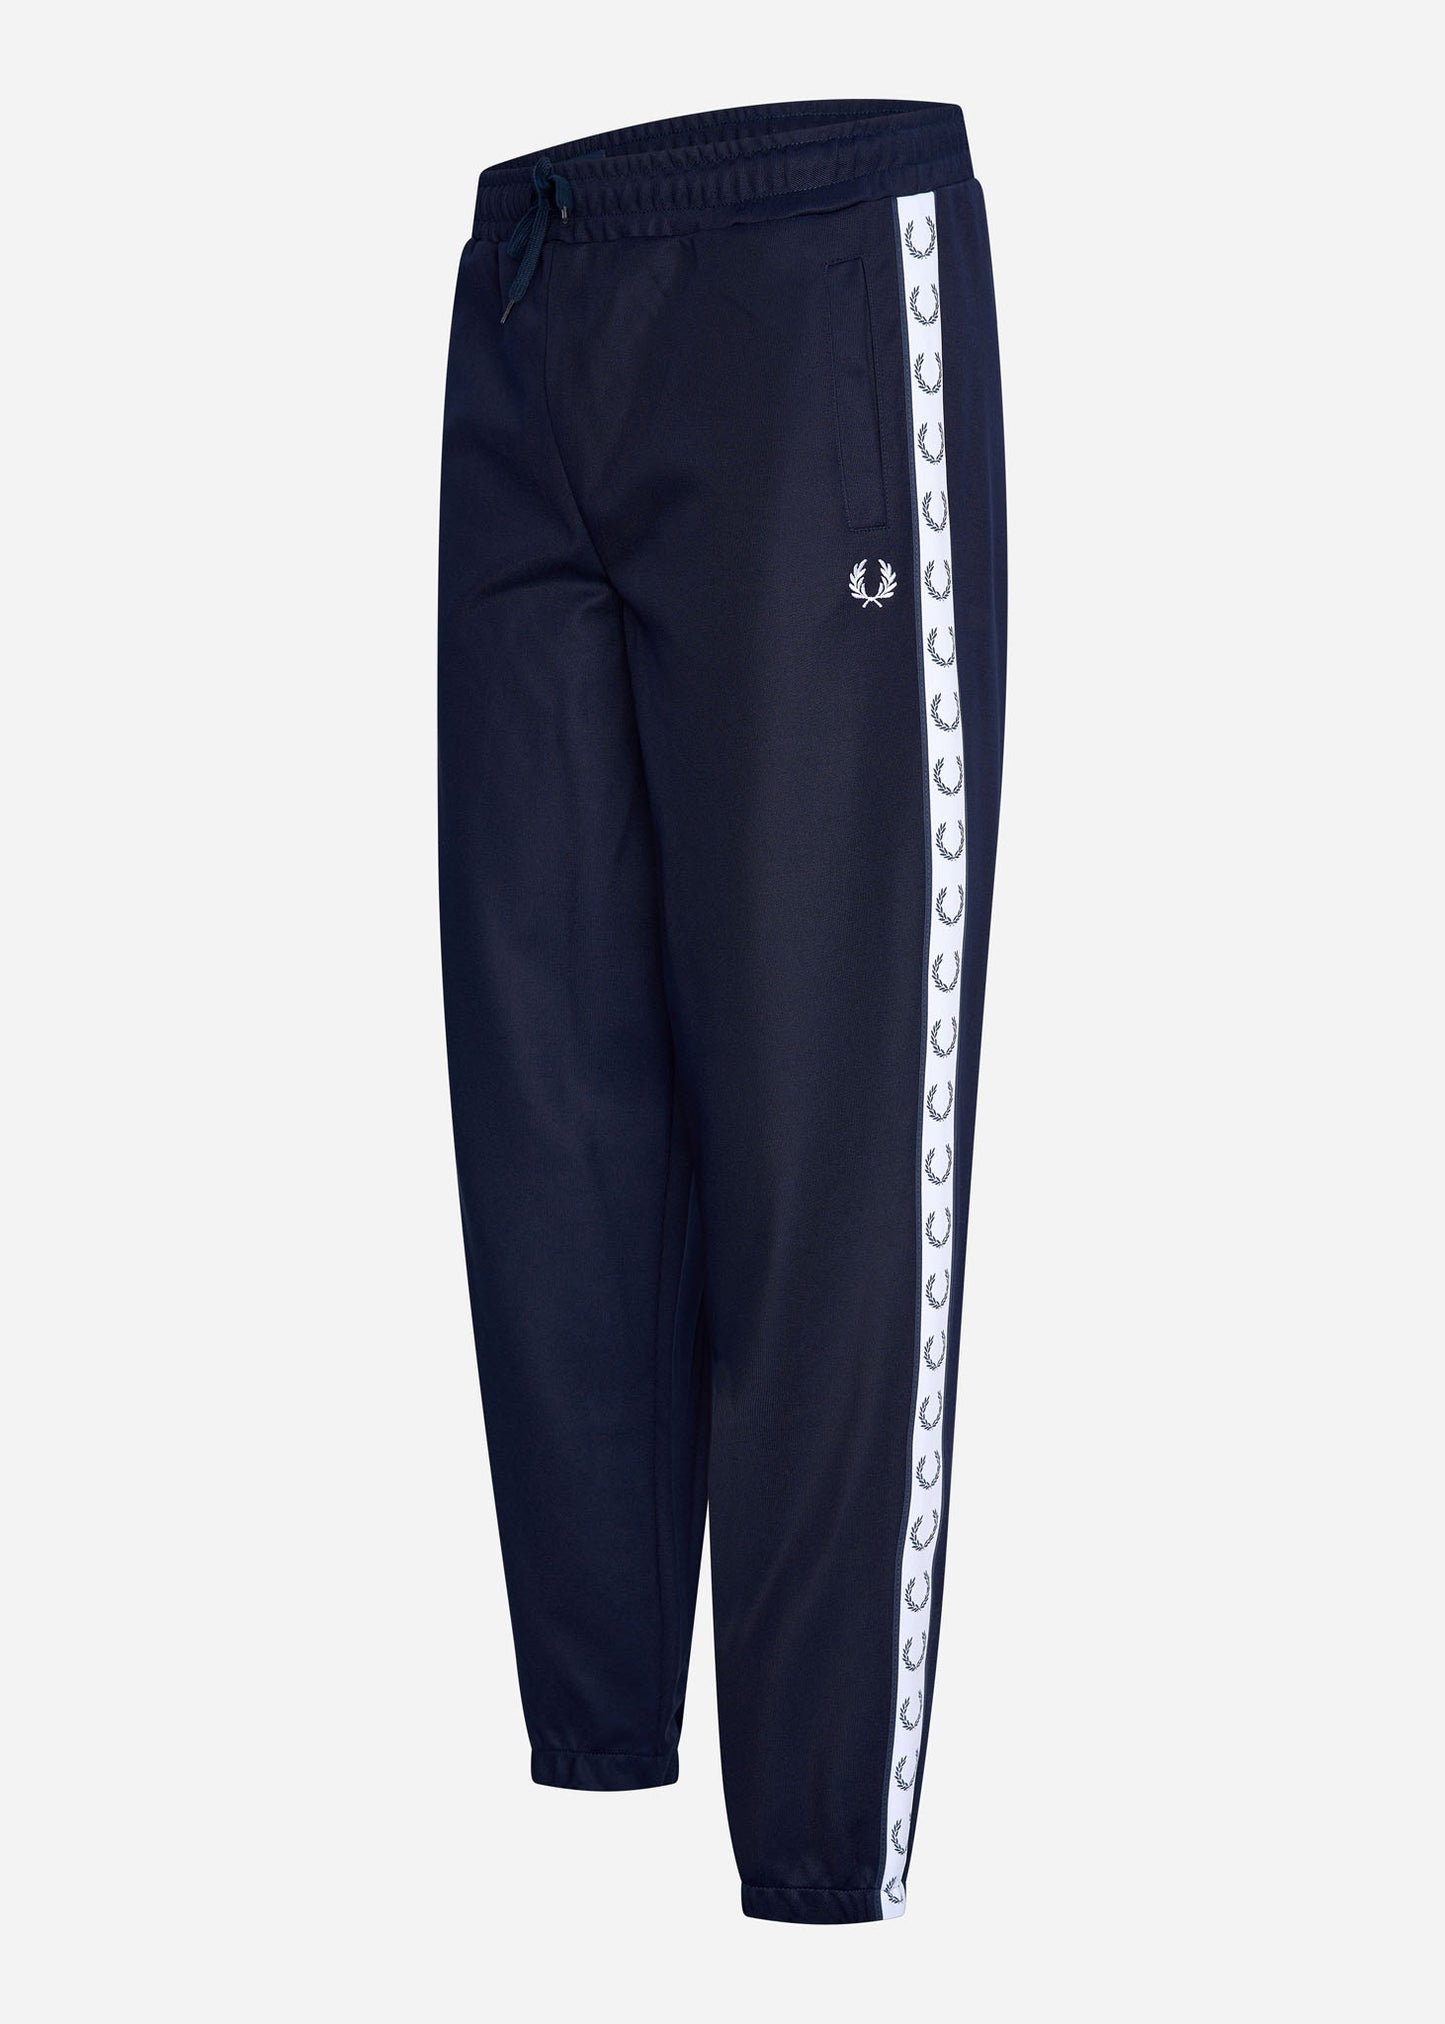 Fred Perry track pant carbon blue